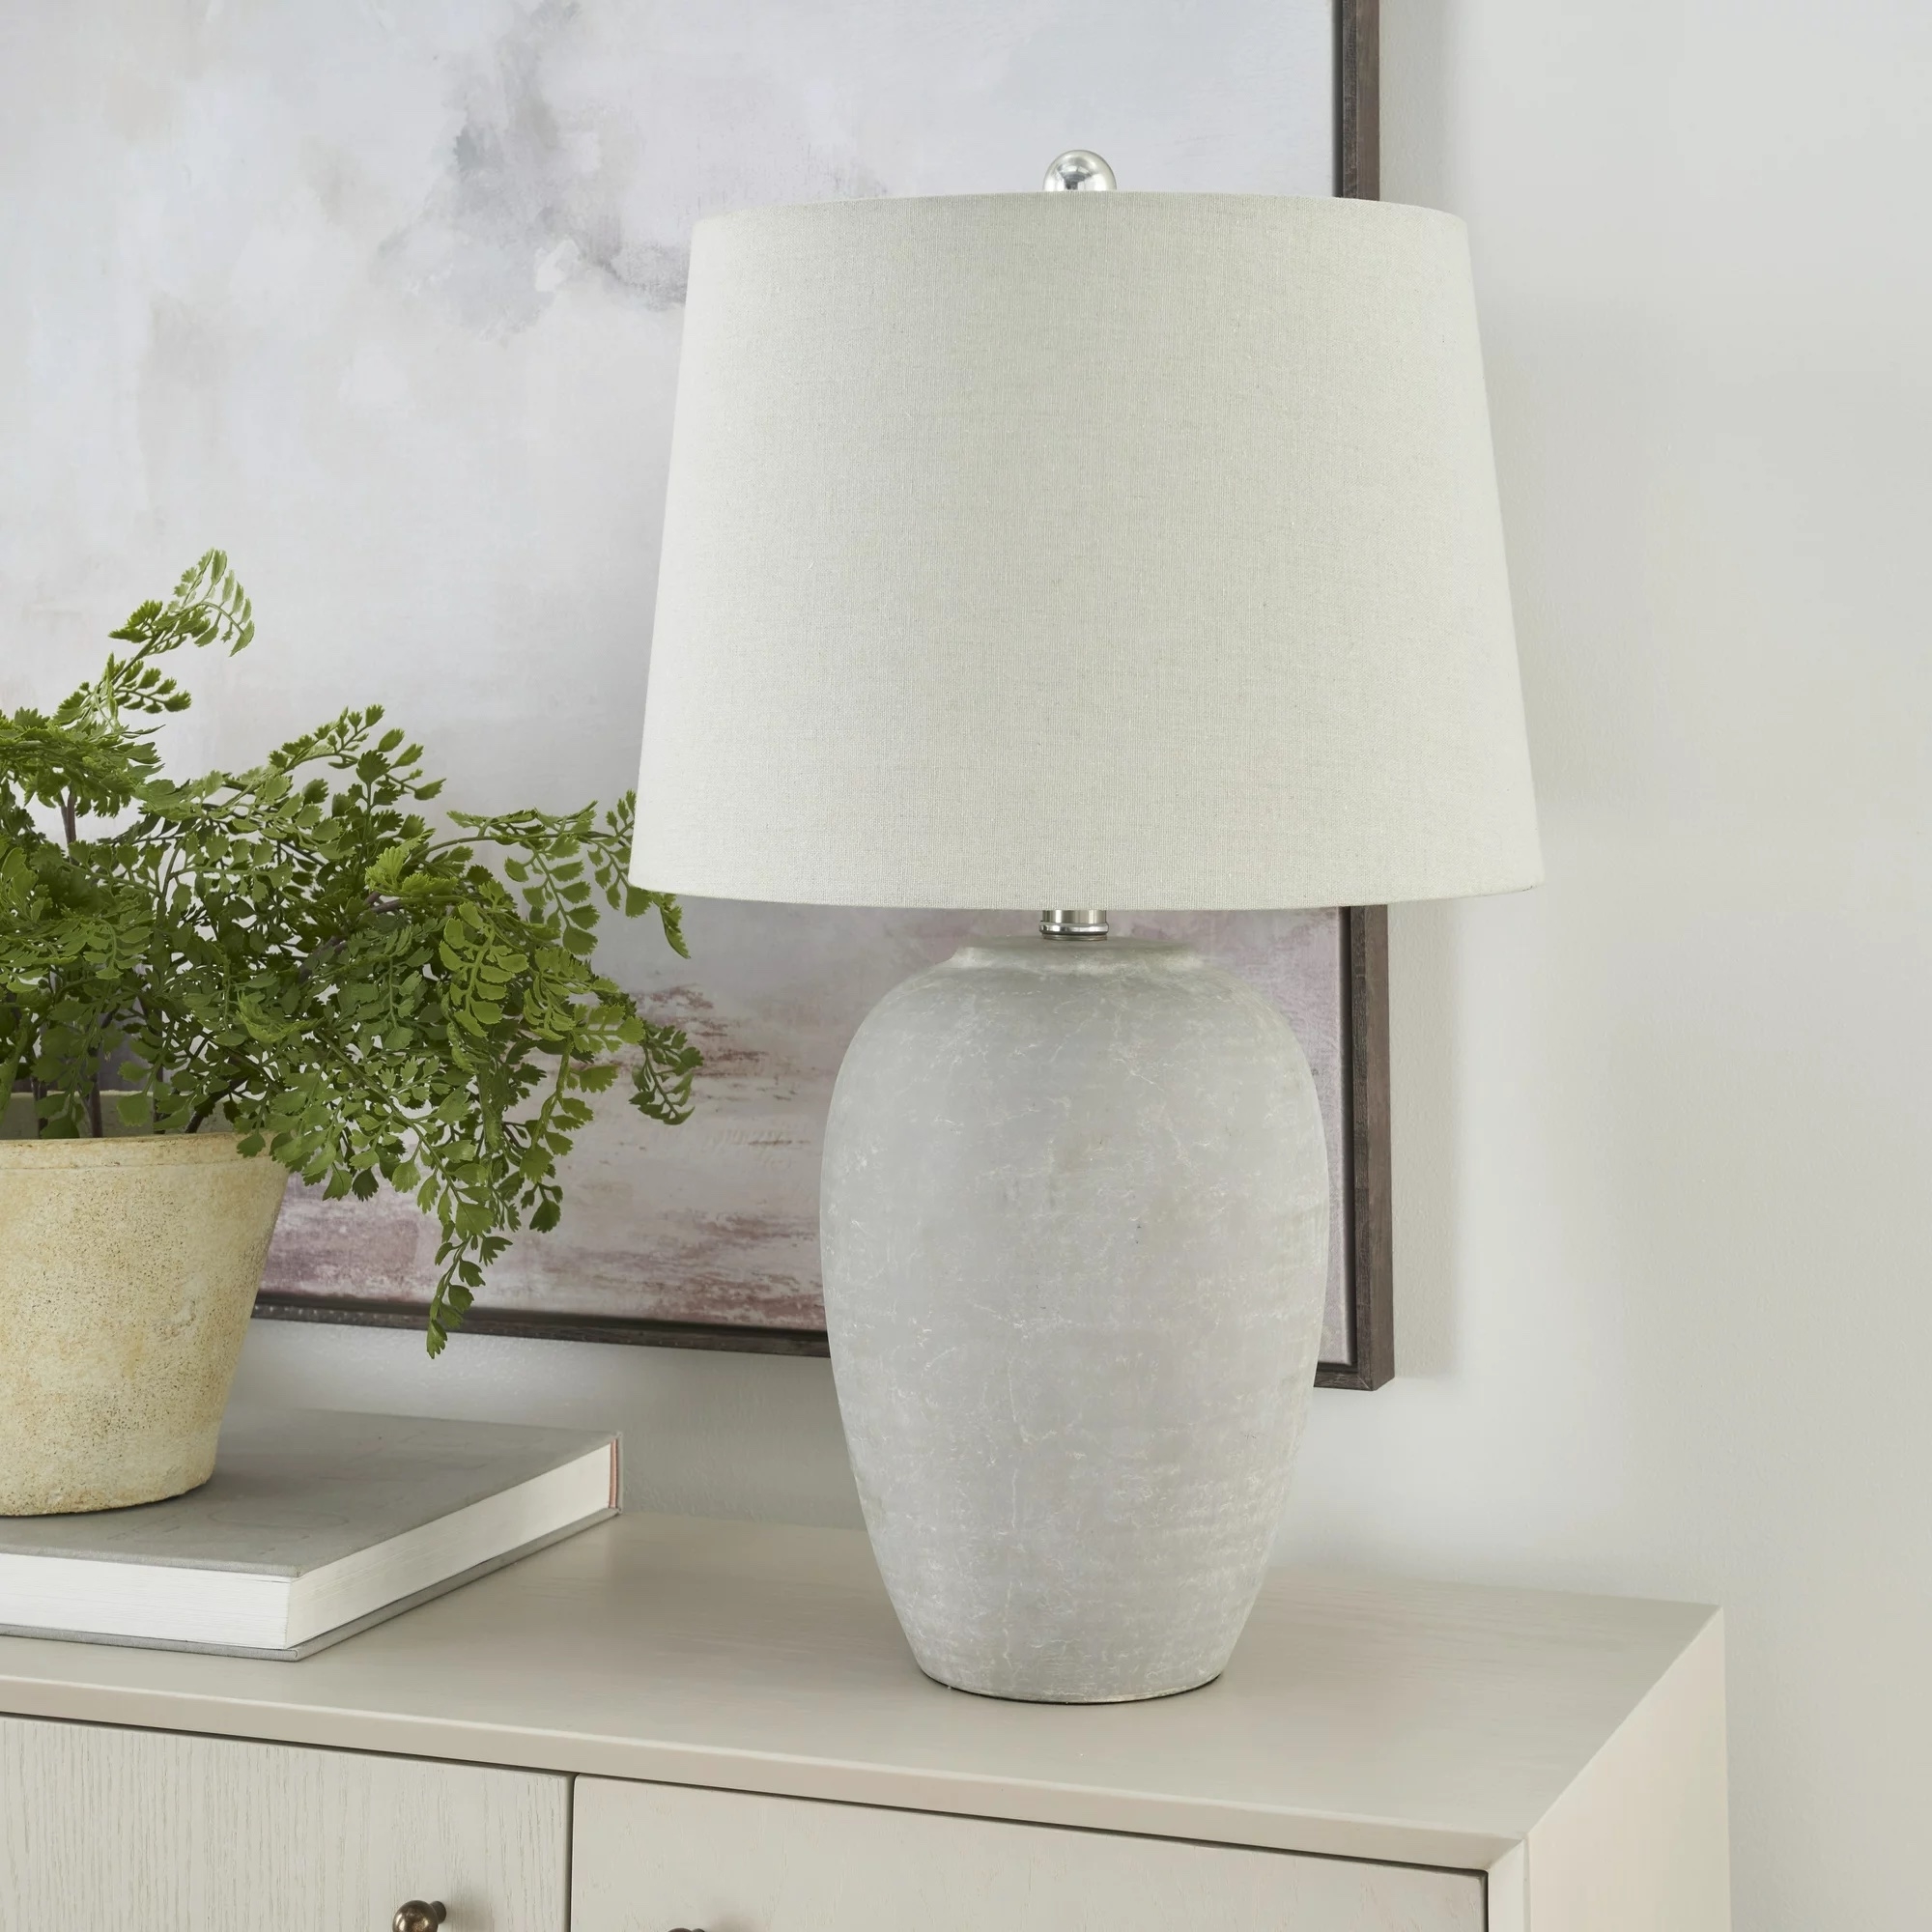 the rustic grey table lamp